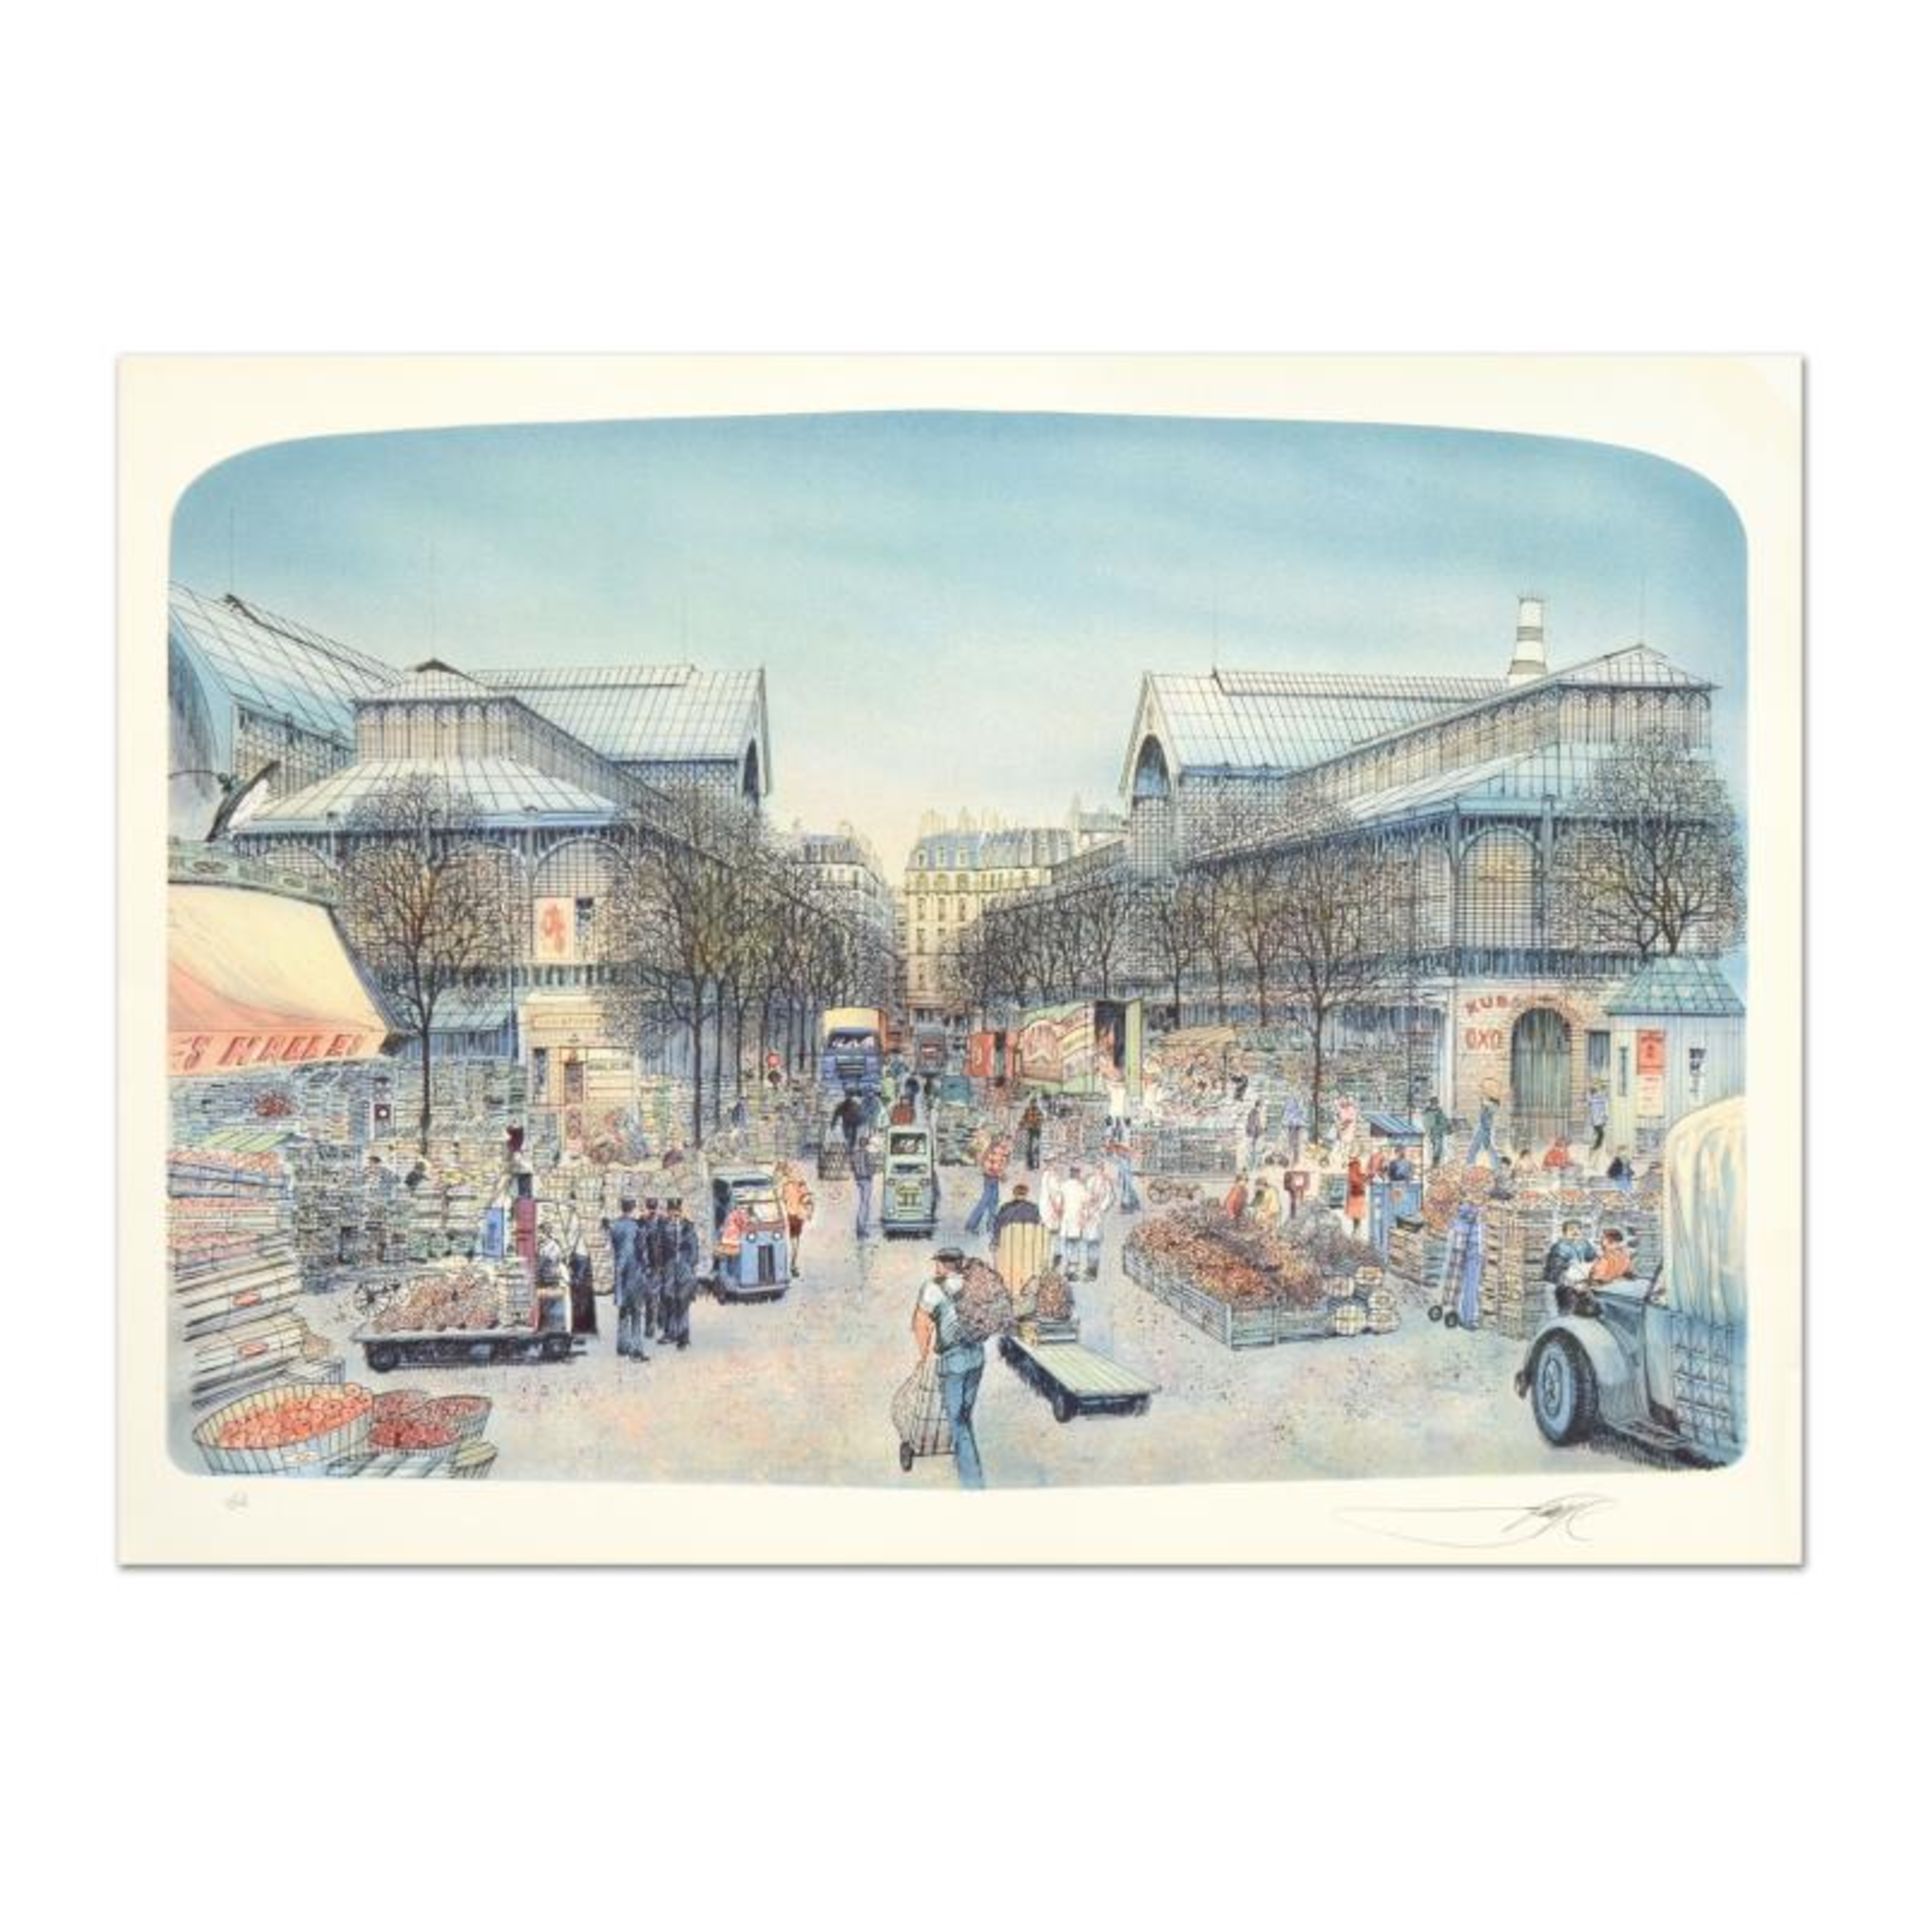 Rolf Rafflewski, "Les Halles" Limited Edition Lithograph, Numbered and Hand Sign